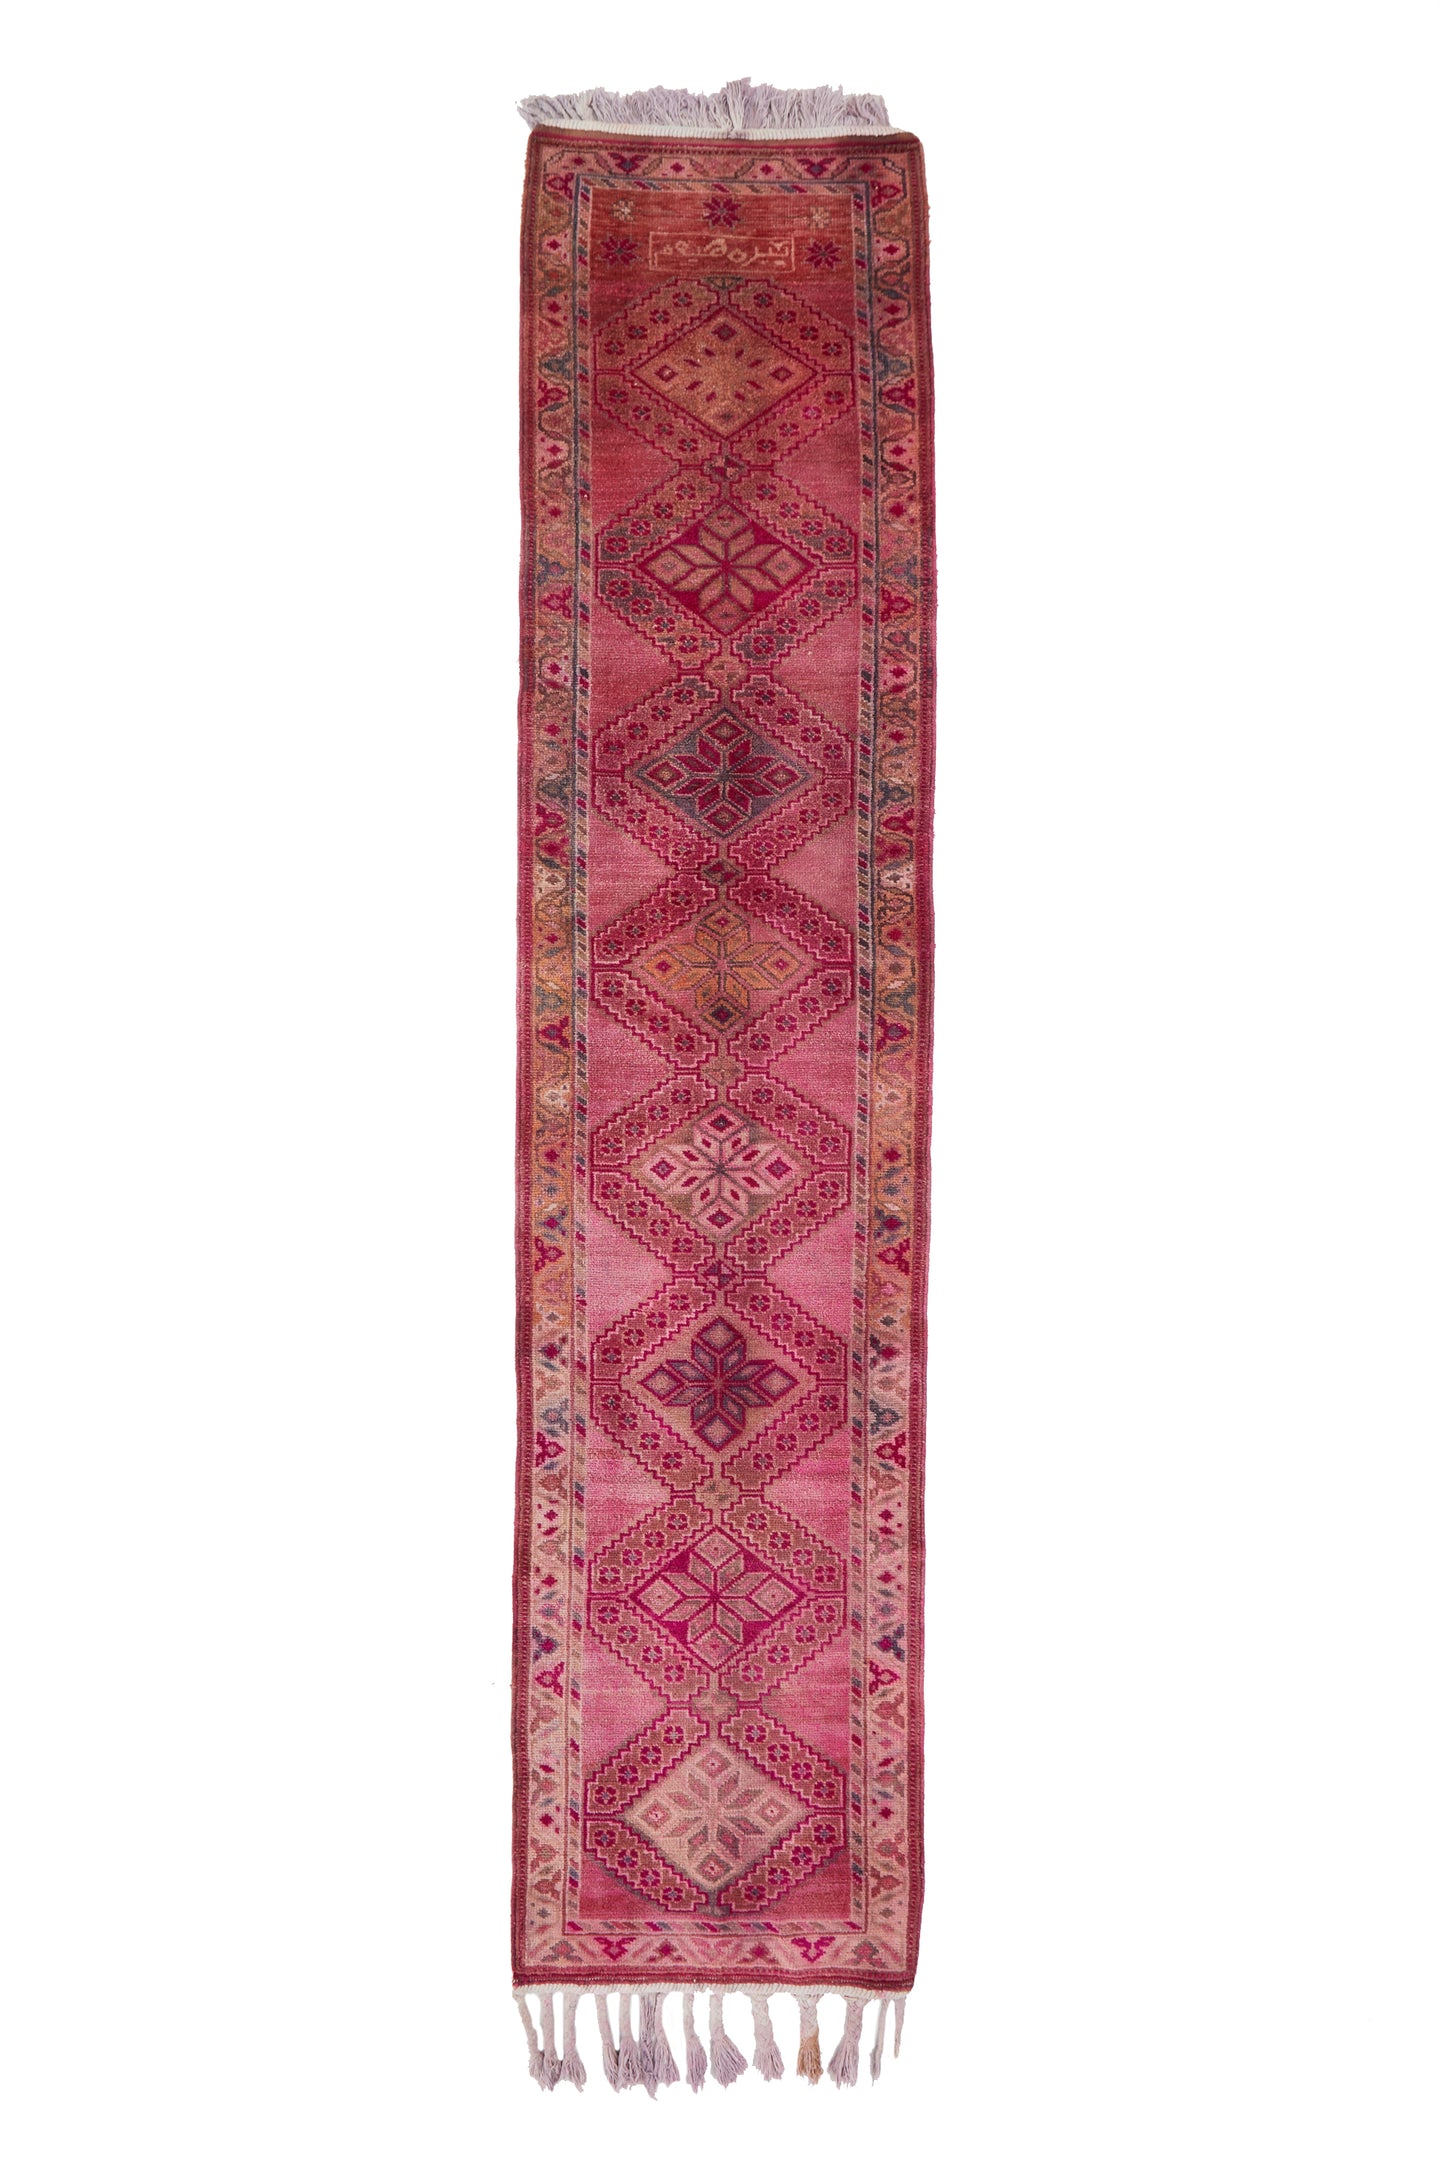 'Macaron' Turkish Ombré Runner Rug - 2'8" x 12'9" - Canary Lane - Curated Textiles